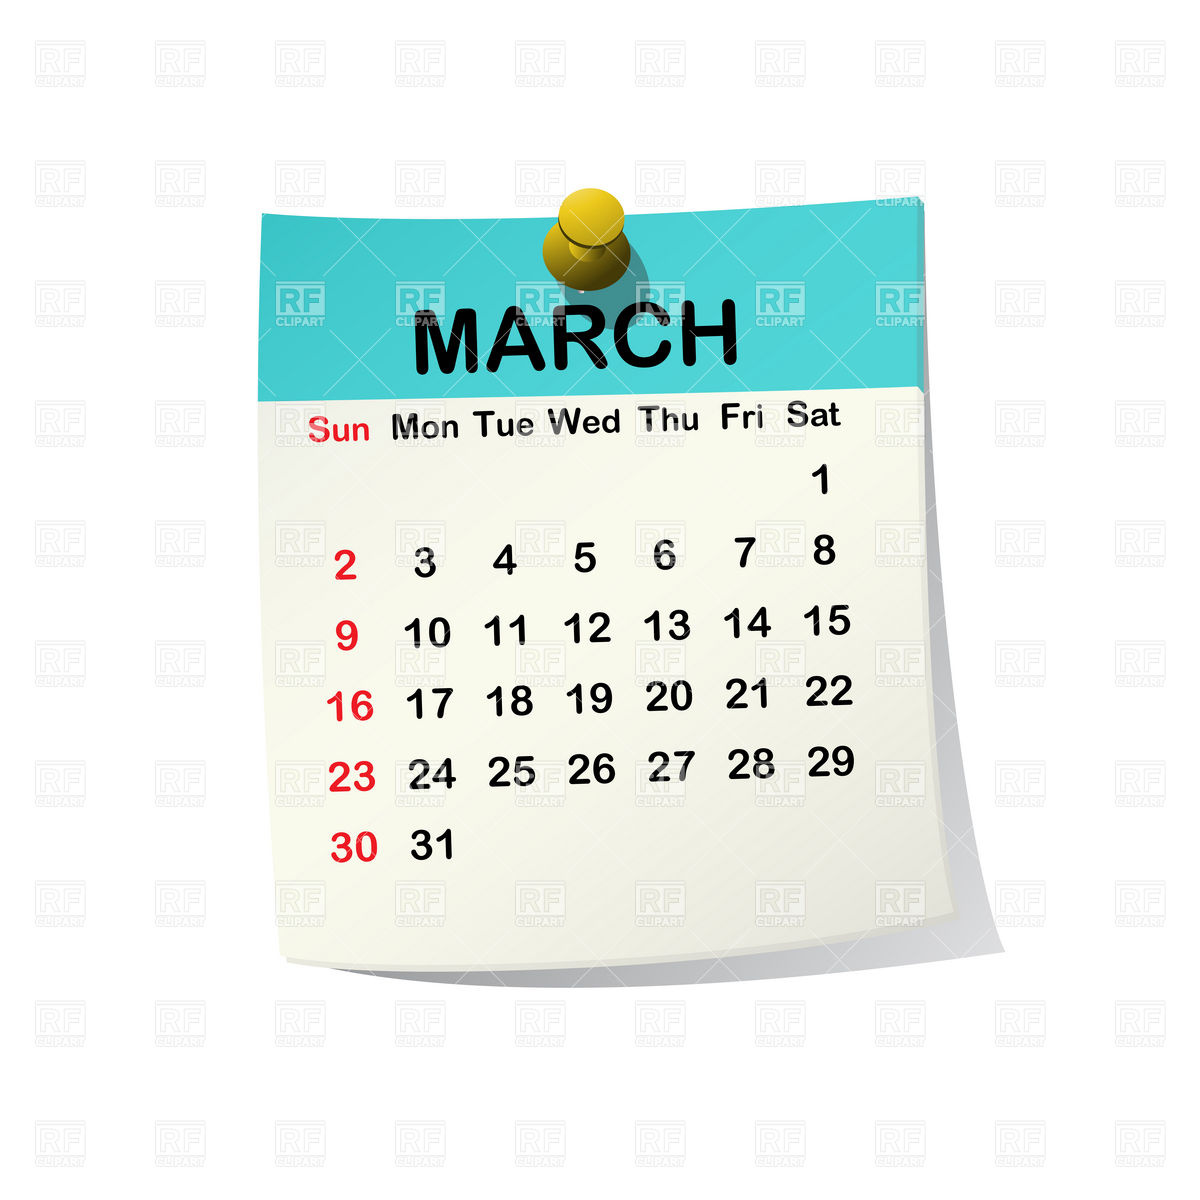 March 2014 Month Calendar 20535 Calendars Layouts Download Royalty